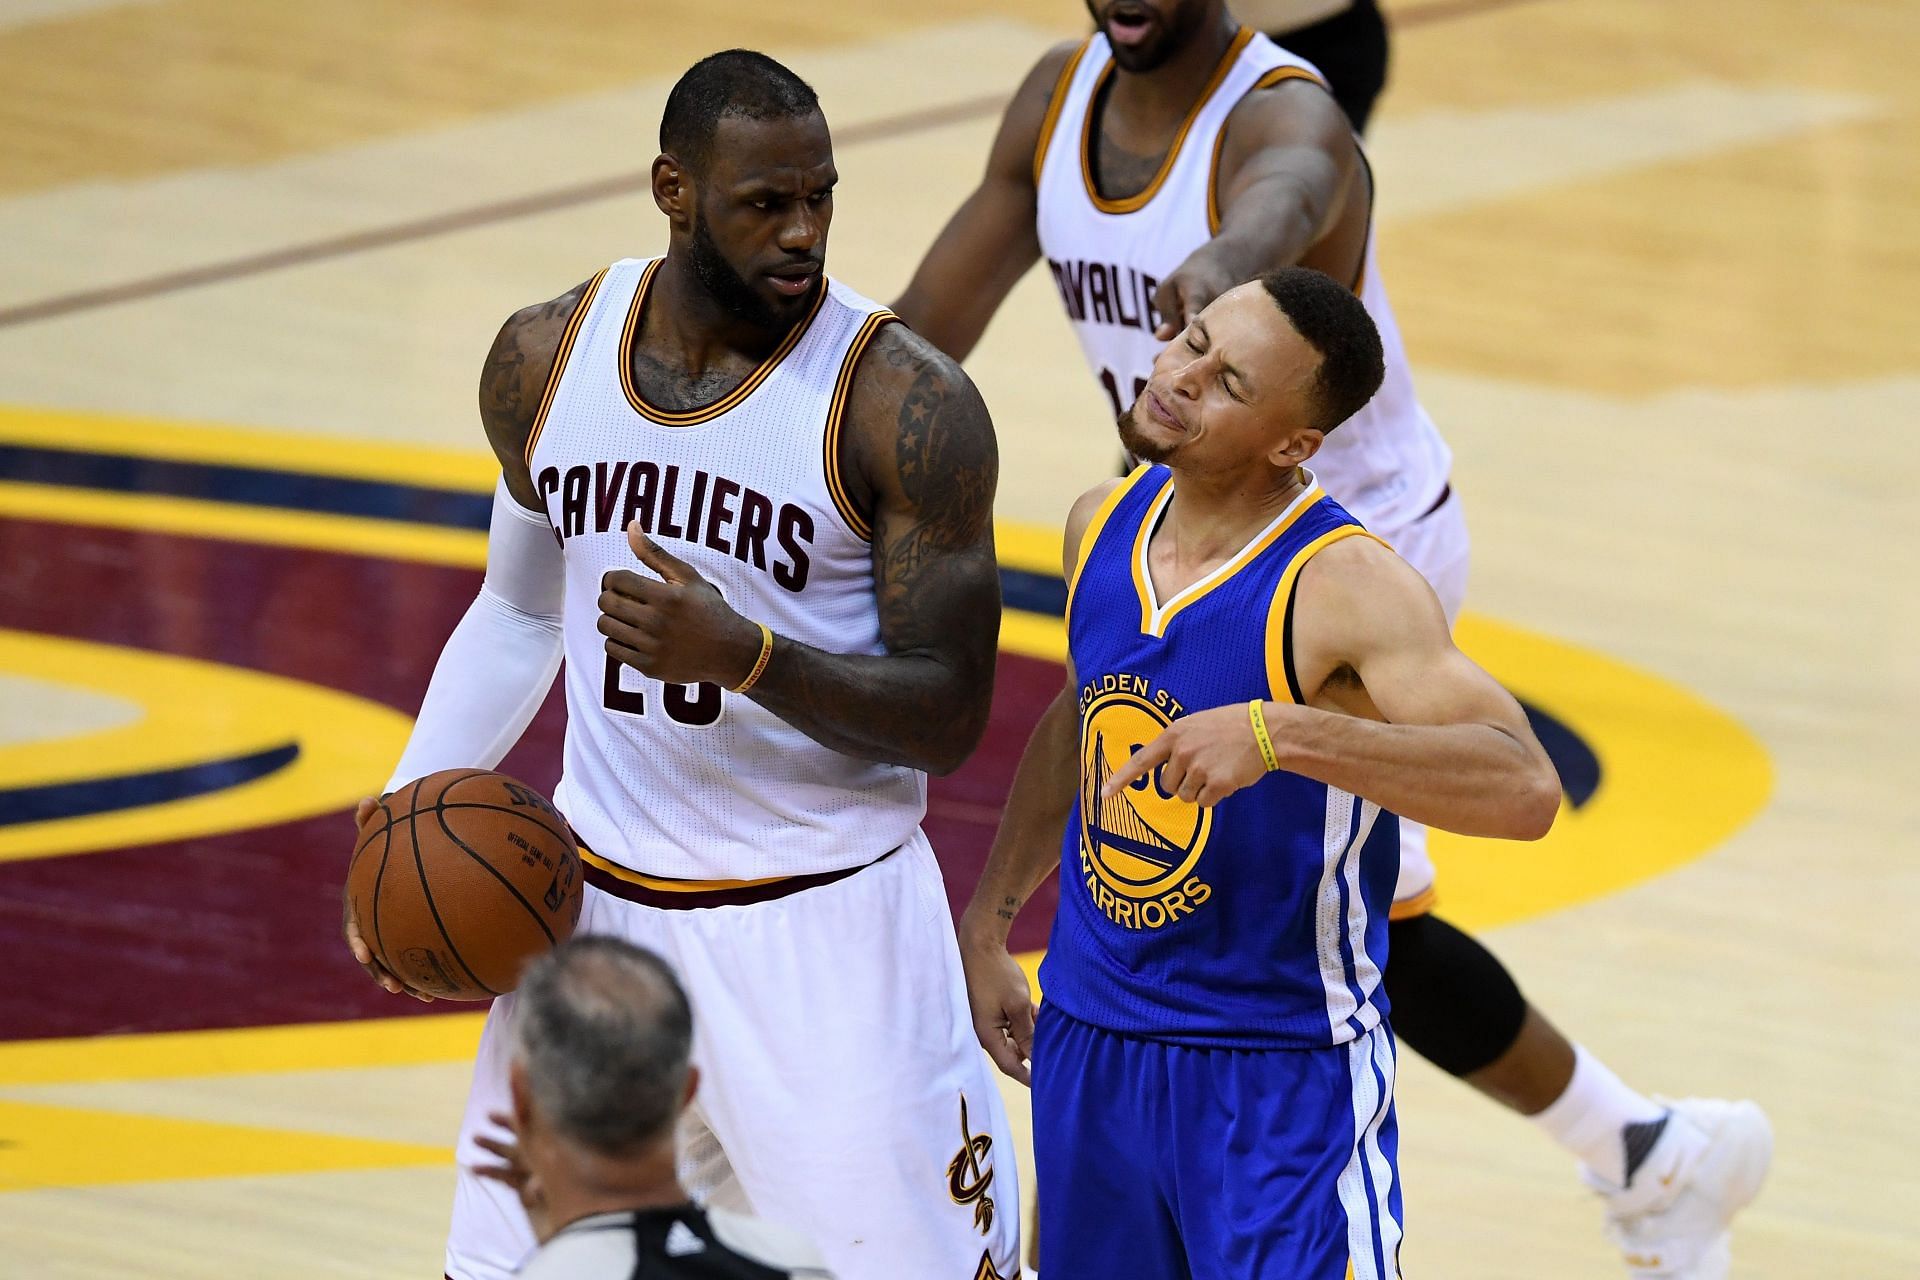 LeBron vs Steph - one of the top rivalries